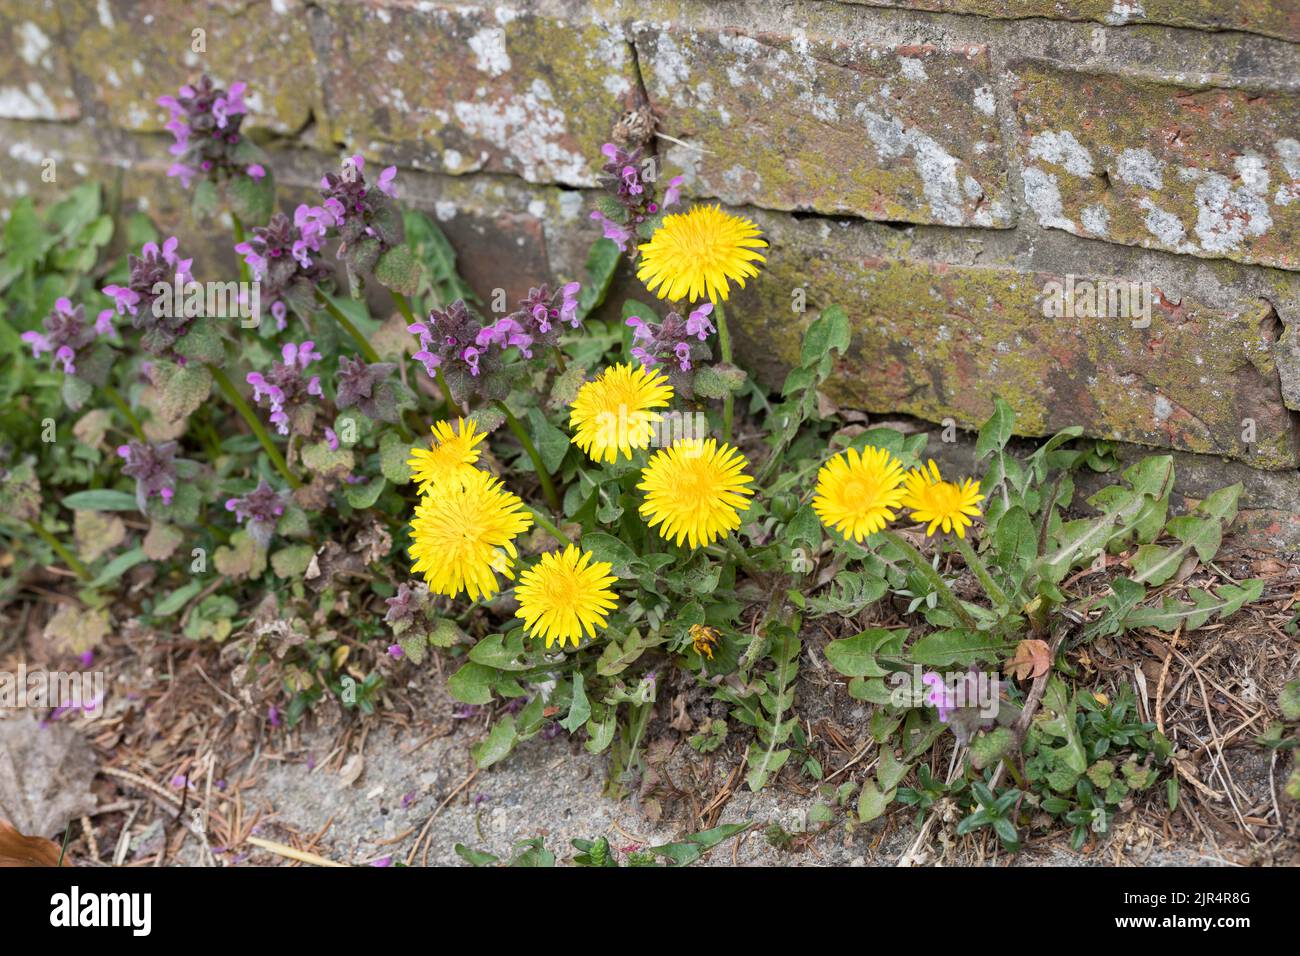 common dandelion (Taraxacum officinale), with red dead nettle, Lamium purpureum, at the foot of a wall, Germany Stock Photo